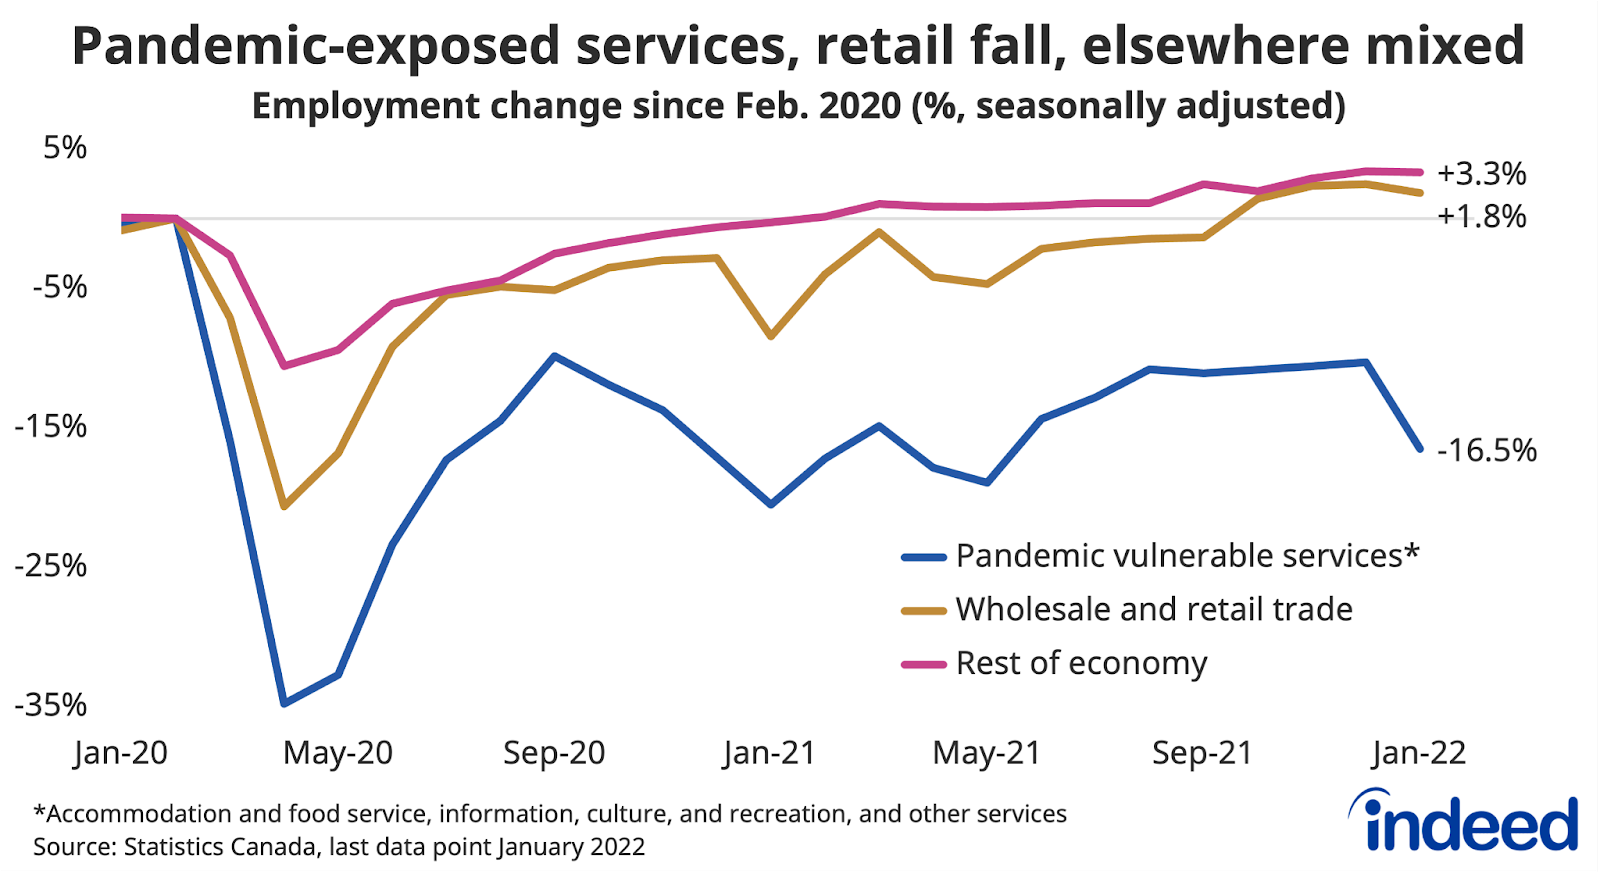 Chart showing the percentage change in employment since February, 2020, seasonally adjusted. The chart compares pandemic vulnerable services, wholesale and retail trade and the rest of the economy. The chart shows that employment in pandemic-exposed sectors declined sharply in January 2022, while other industries were more mixed. 